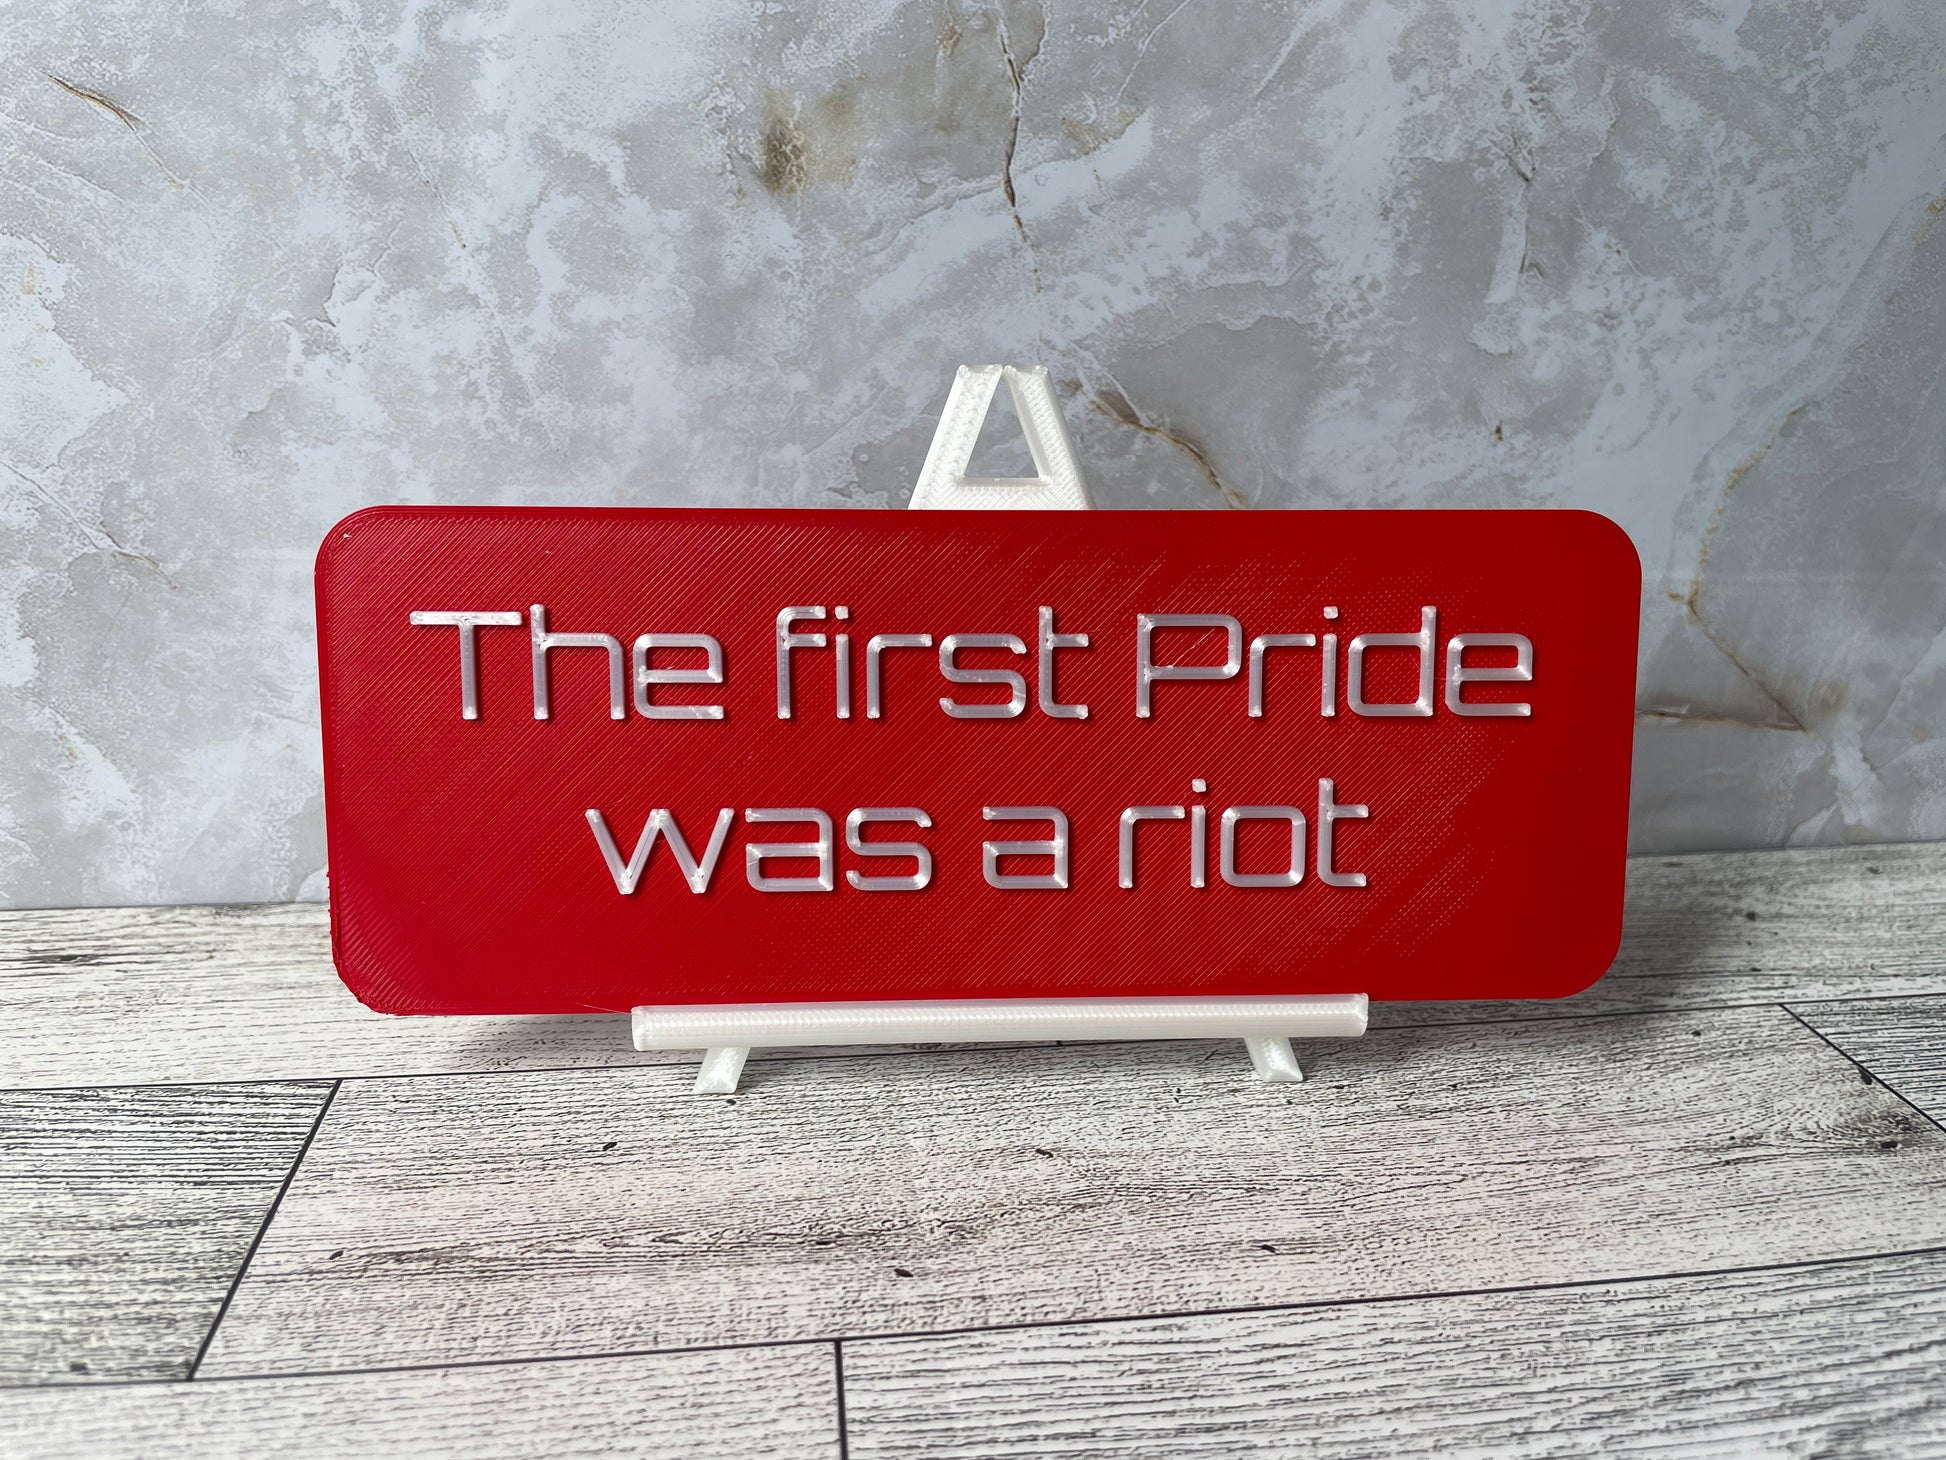 The text "The first Pride was a riot" is in shiny white text on a red sign. The sign is on a shiny white easel on a light woodgrain desk. The wall is a light marble with shades of white and tan.